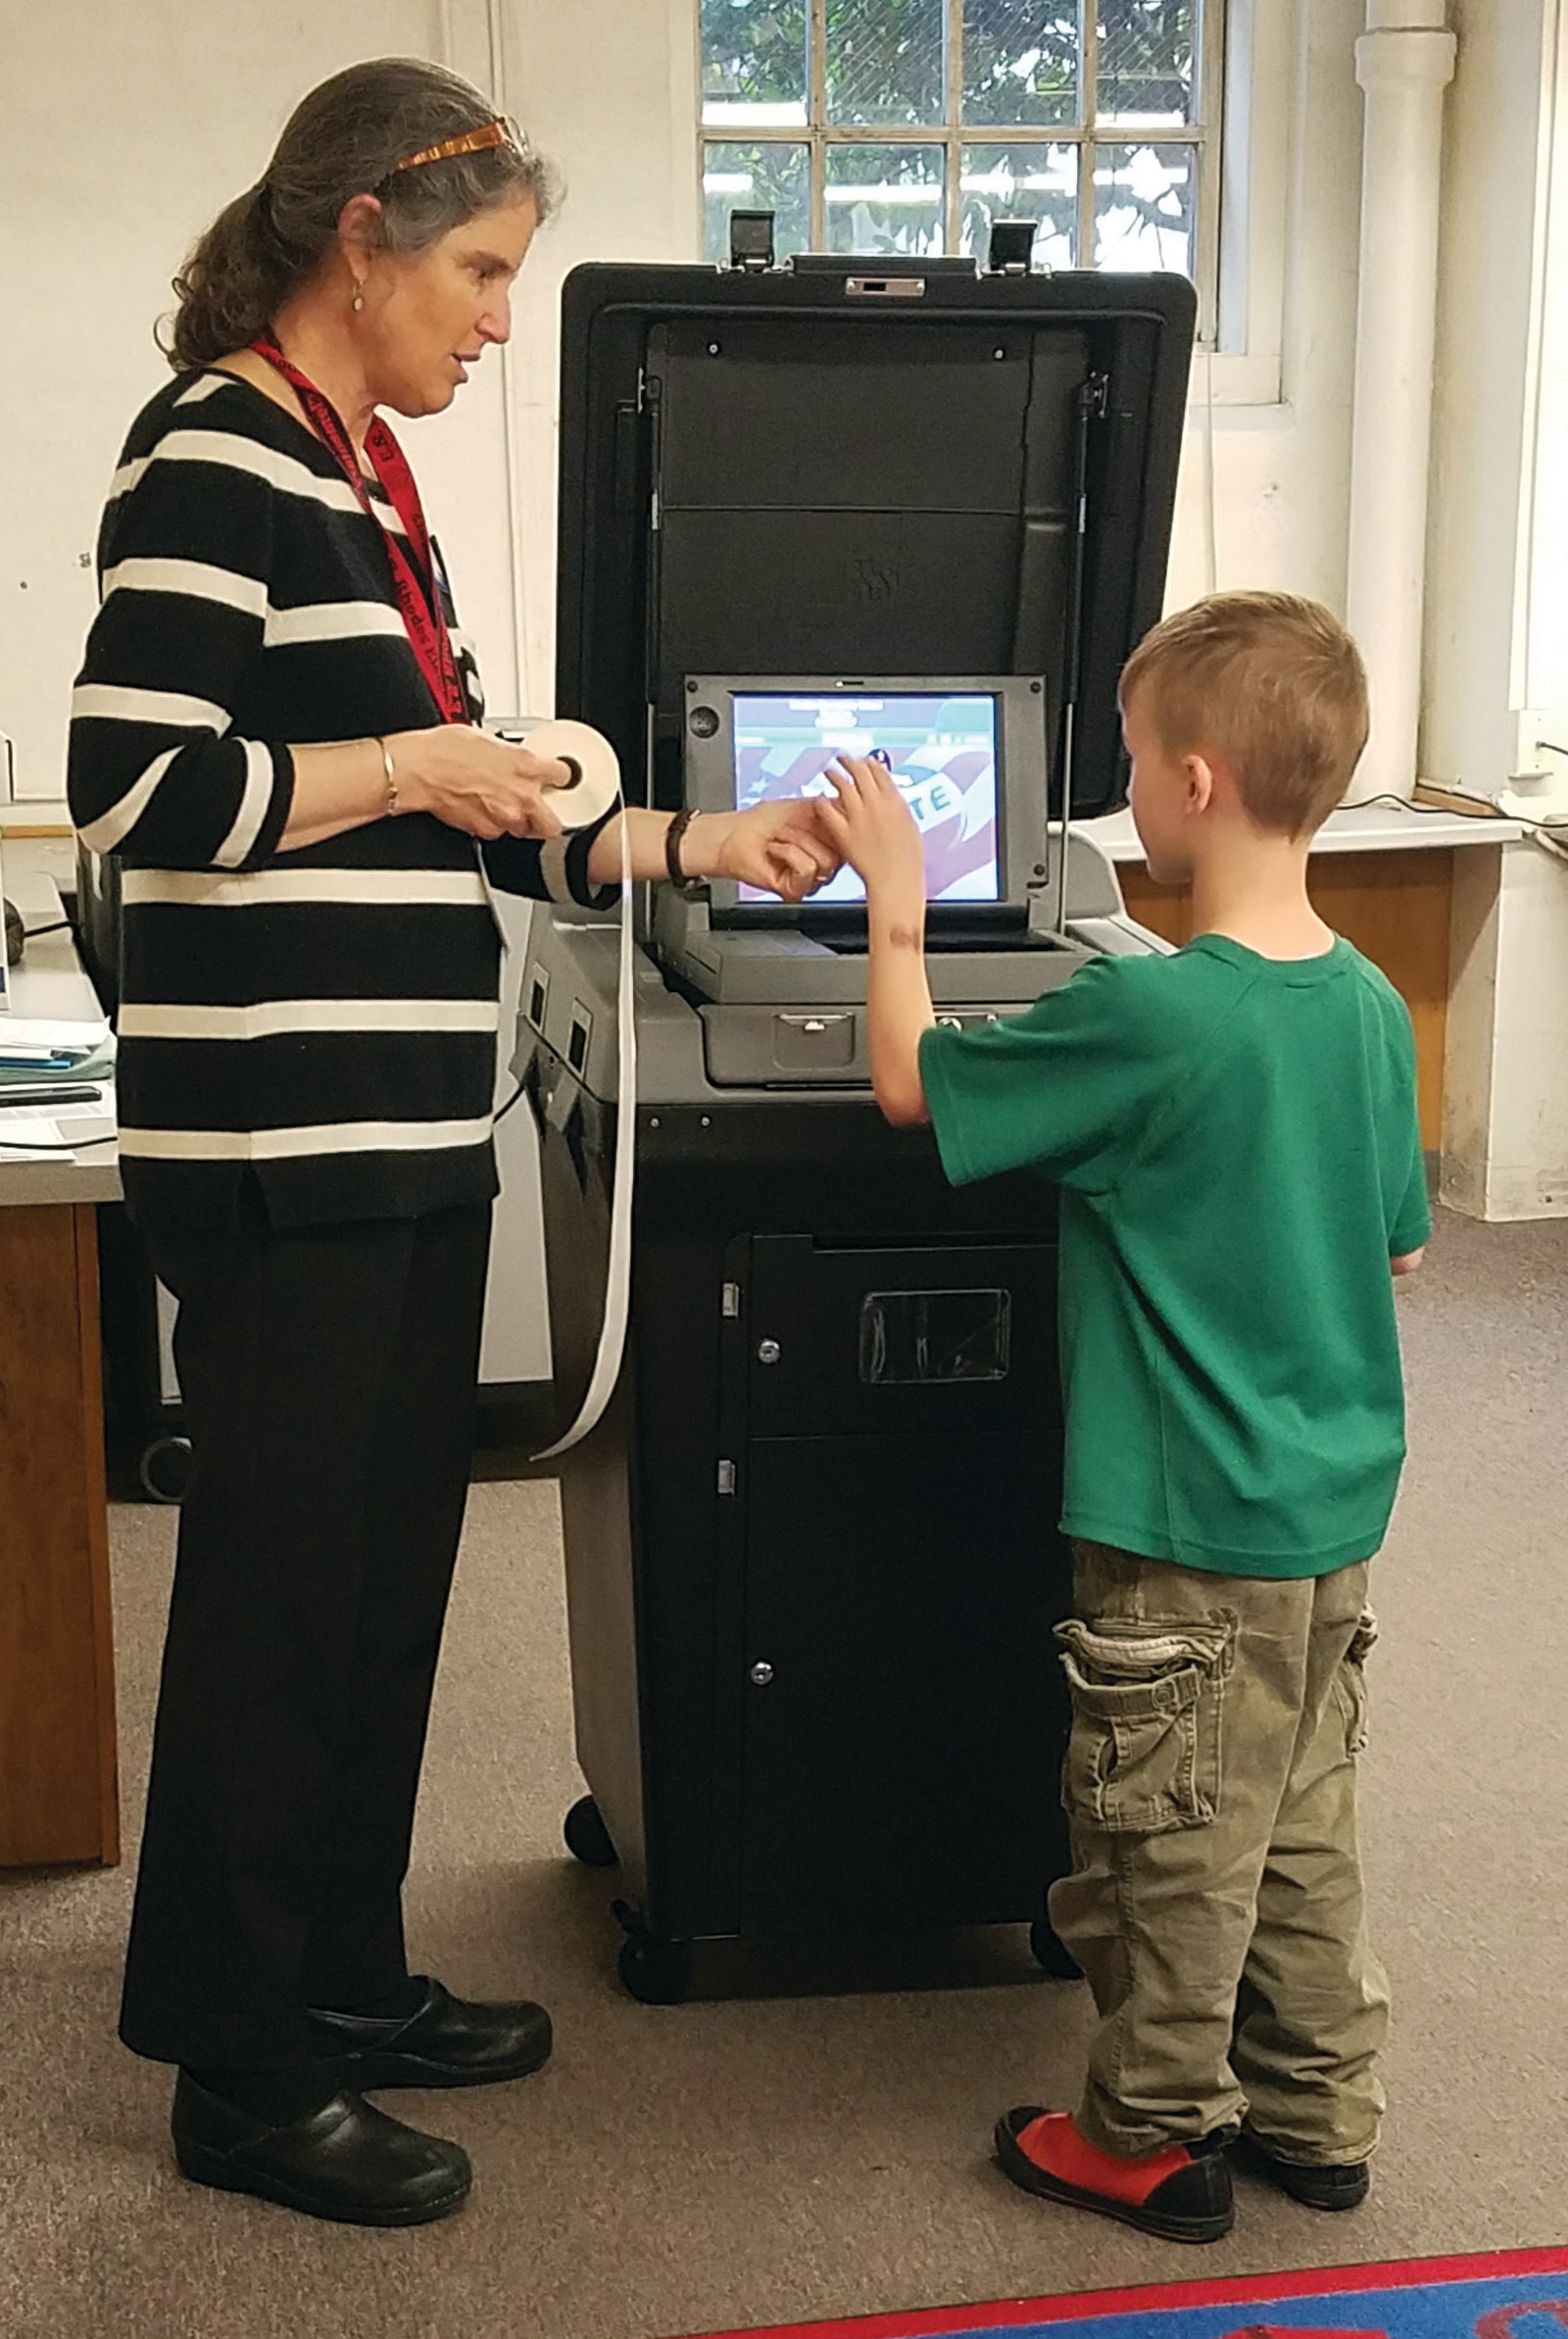 AN AUTHENTIC ELECTION: All staff and students were given the opportunity to vote, using real ballots and a real voting machine, casting their votes in completely privacy. Students were given an "I voted" sticker after casting their ballots.